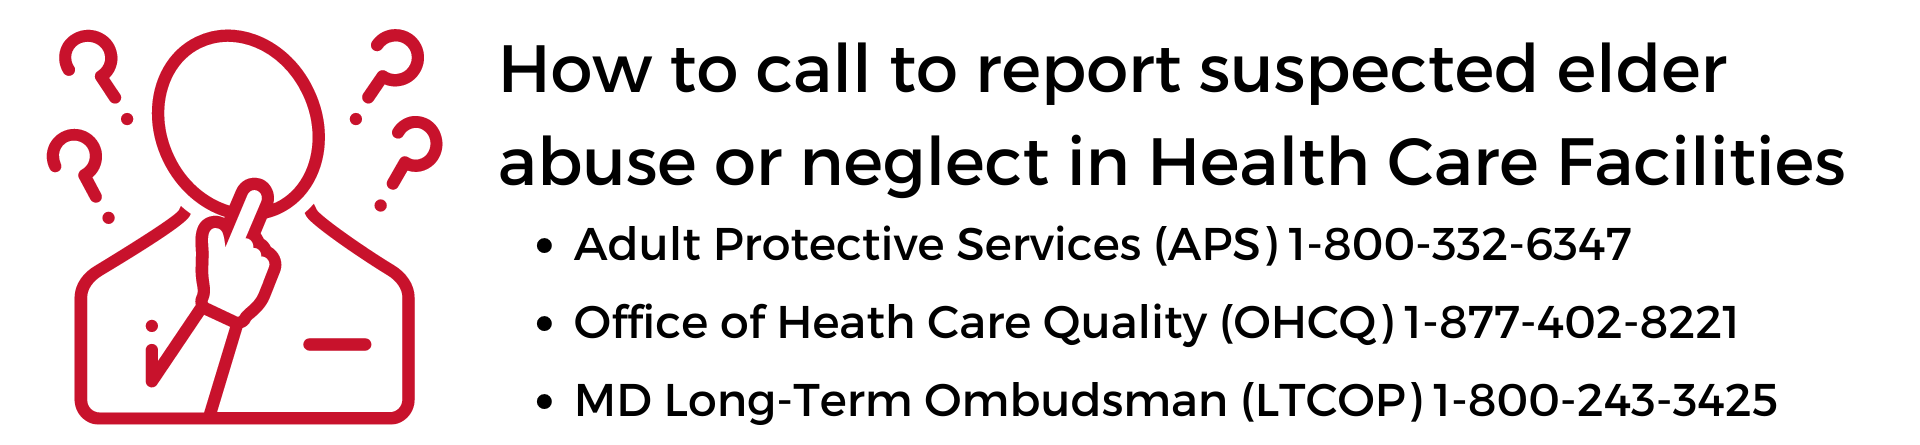 How to report suspected elder abuse or neglect in Health Care Facilities.png